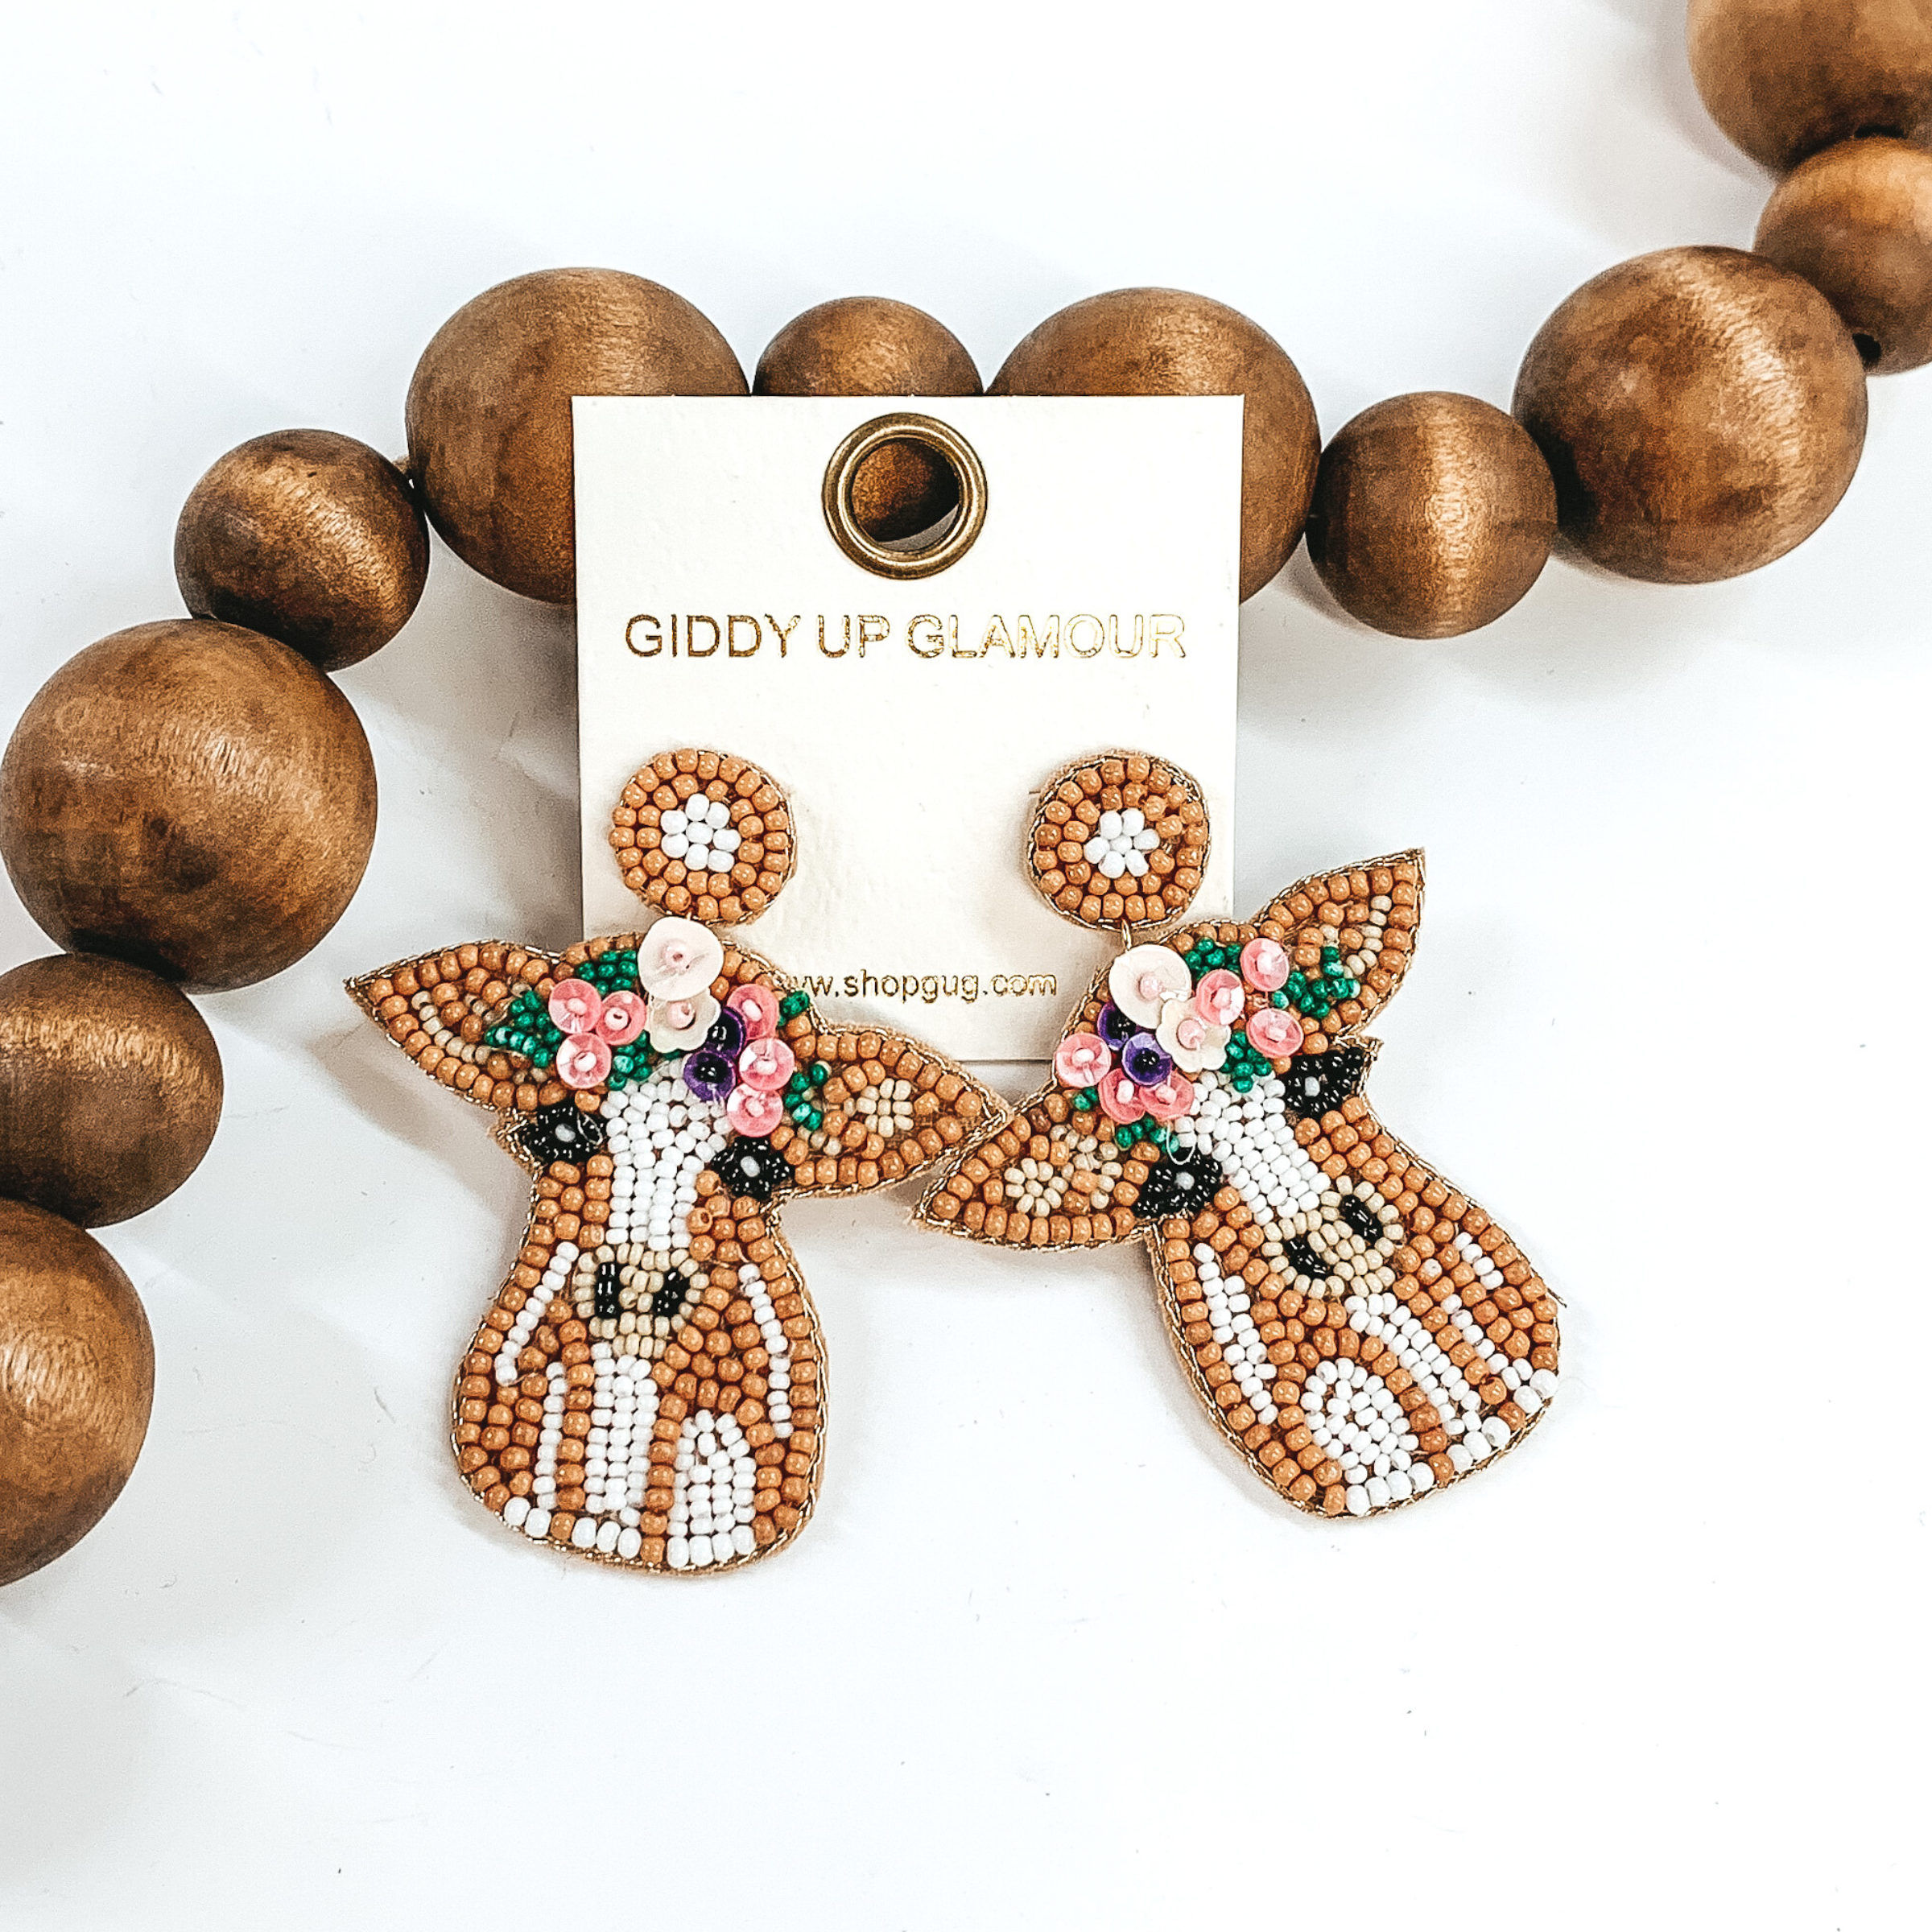 Beaded cow dangle earrings with a post back. The cow is a tan and white detailed cow. There is also beaded flower detailing on the cow head. These earrings are pictured on a white background with brown beads behind it. 